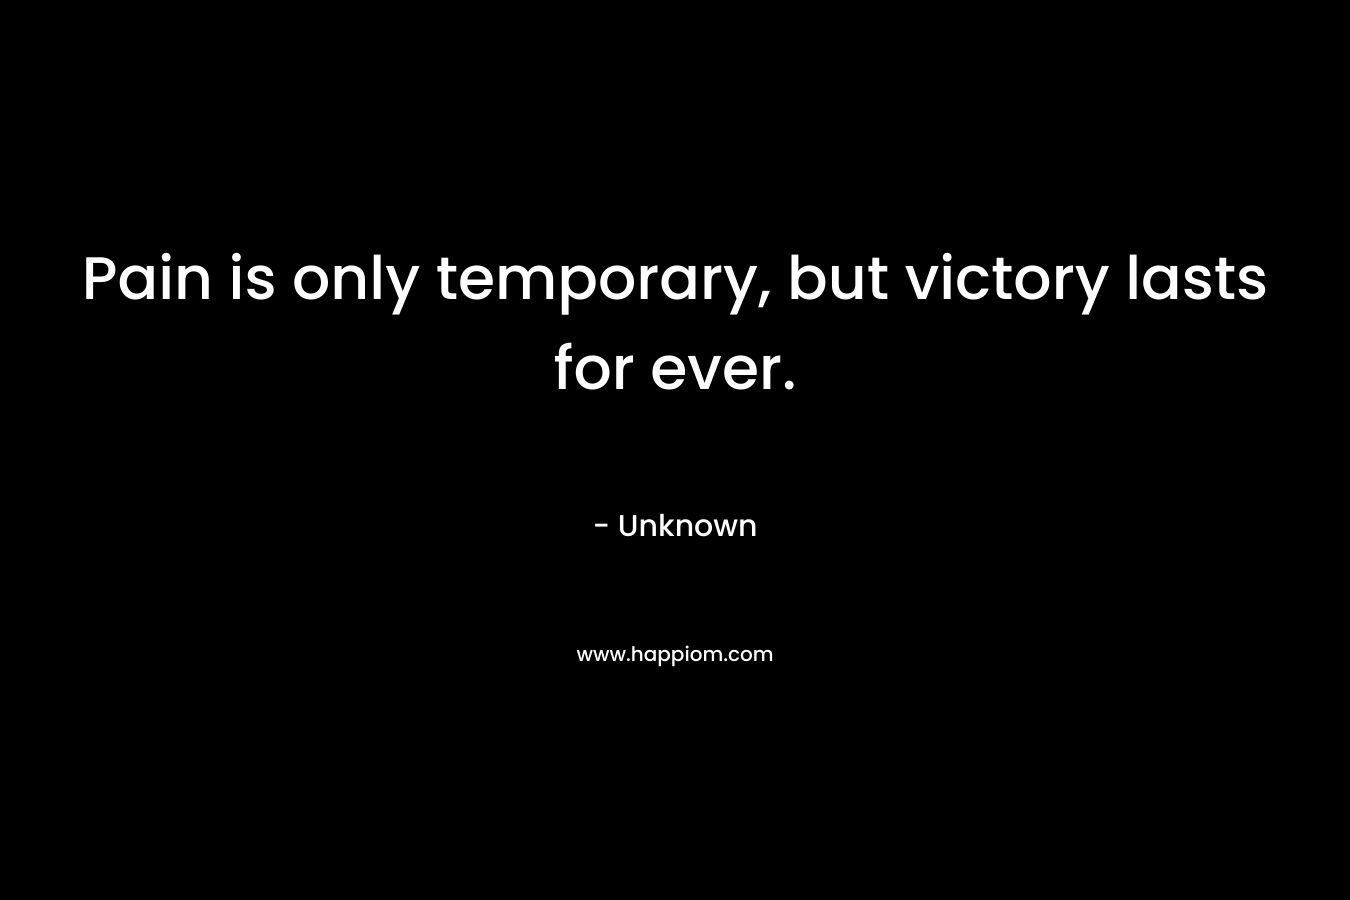 Pain is only temporary, but victory lasts for ever. – Unknown